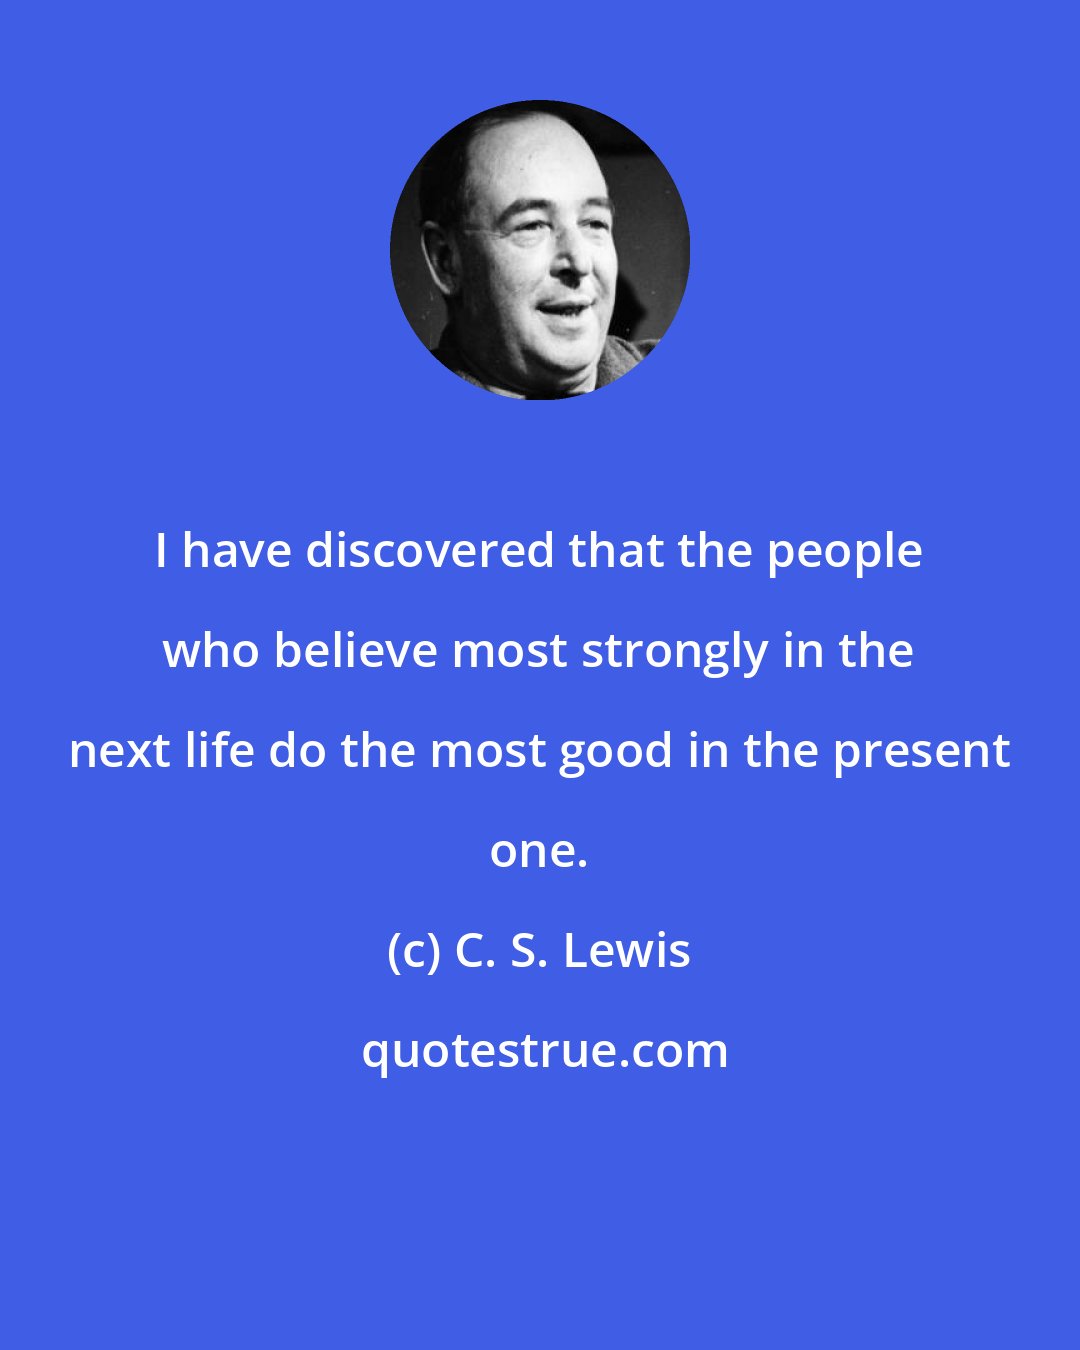 C. S. Lewis: I have discovered that the people who believe most strongly in the next life do the most good in the present one.